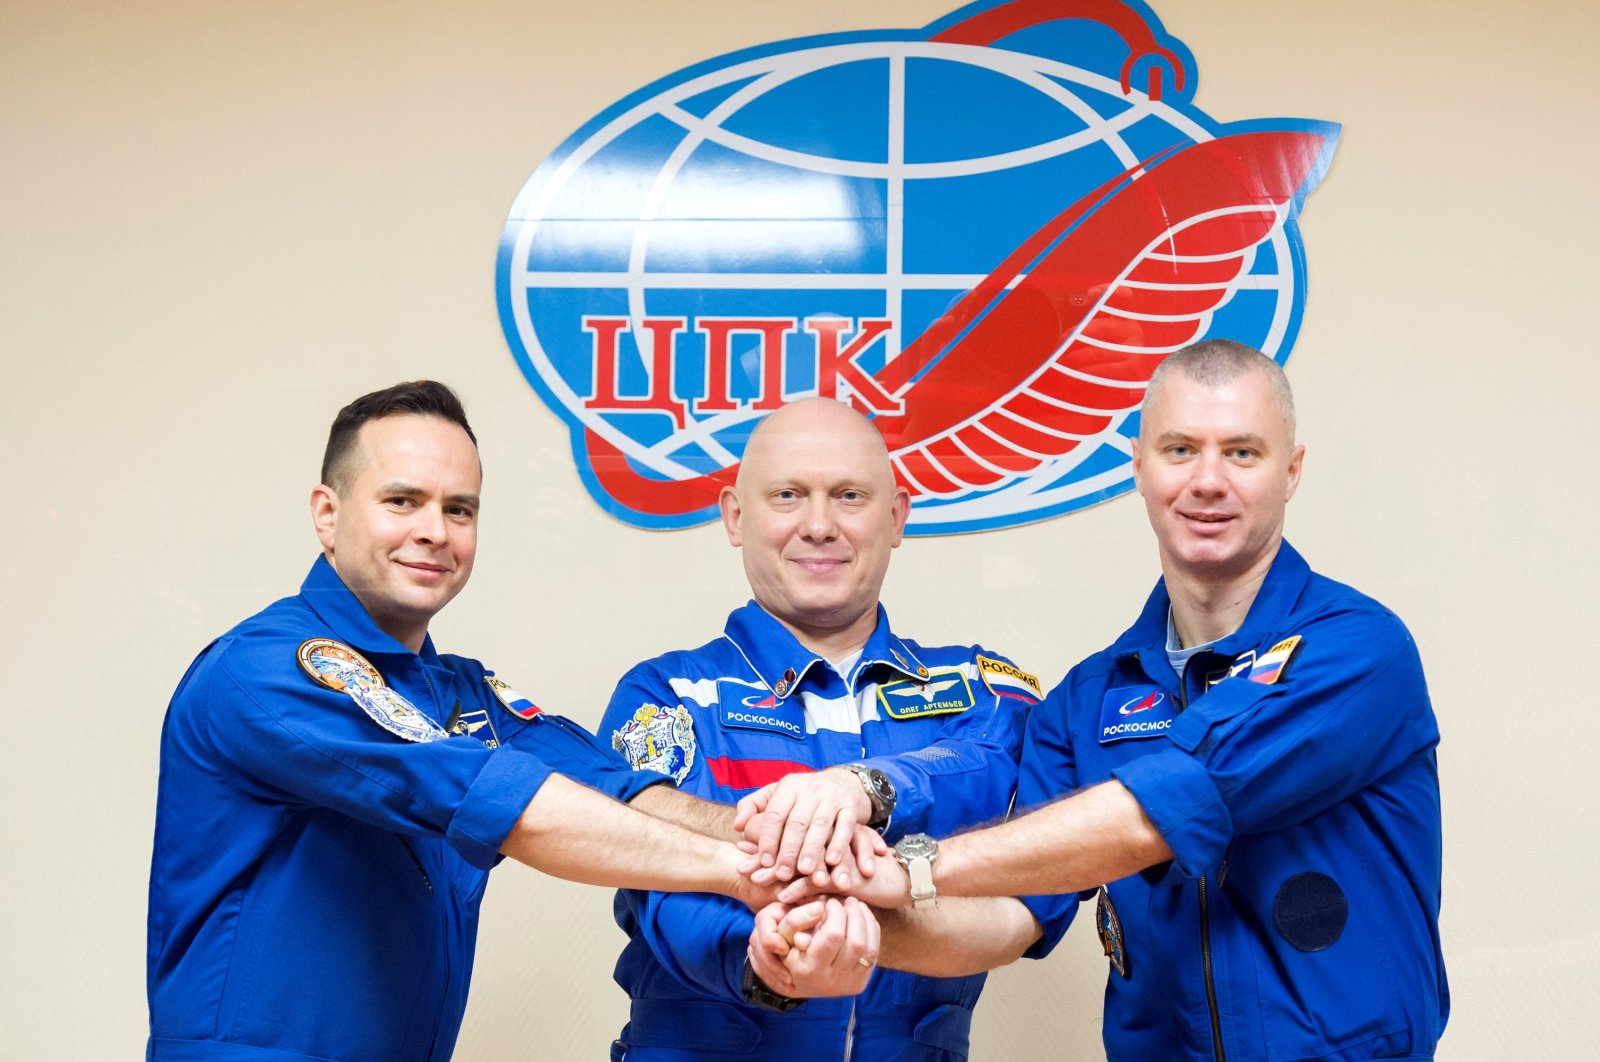 Left to right, Russian cosmonauts Oleg Artemyev, Denis Matveev and Sergey Korsakov pose for a picture during a news conference ahead of the expedition to the International Space Station (ISS) at the Baikonur Cosmodrome, Kazakhstan, March 17, 2022. (Roscosmos Handout via Reuters)